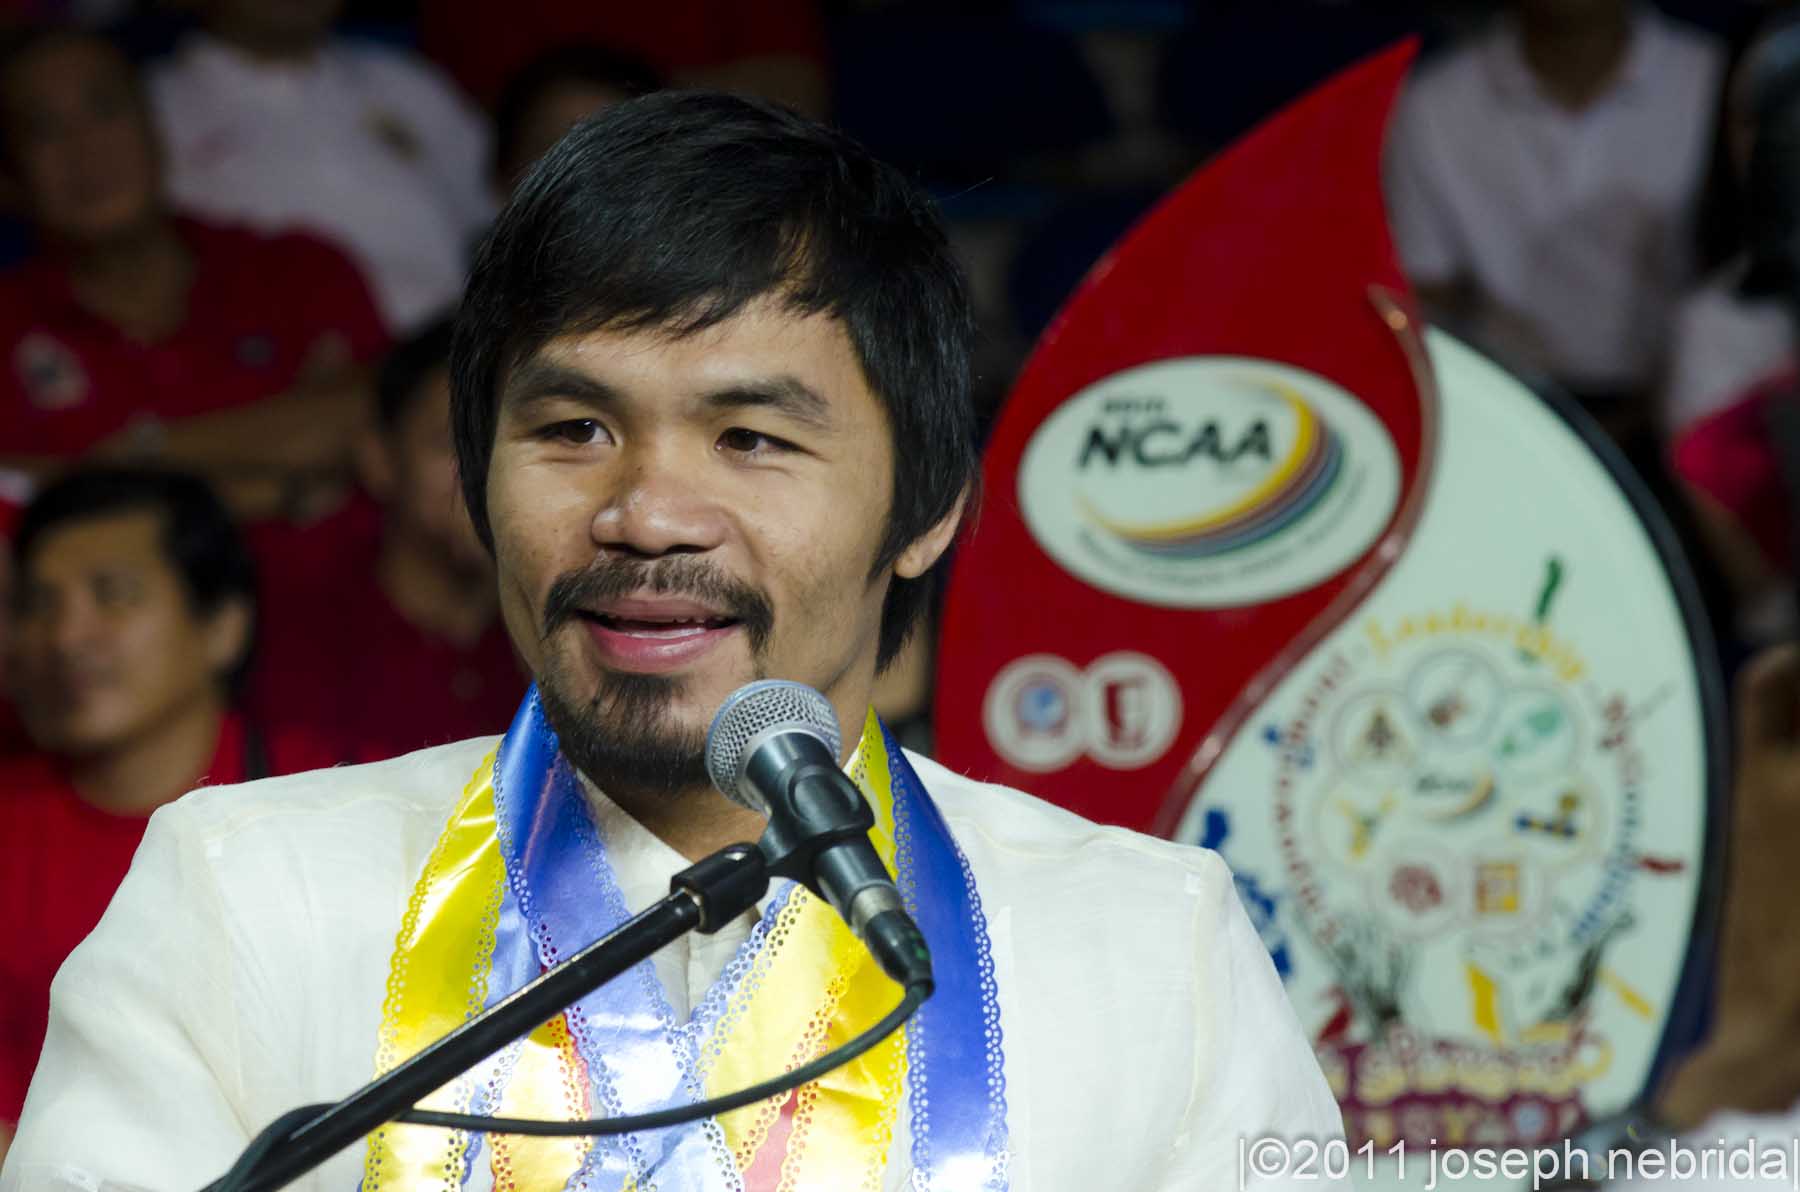 Manny Pacquiao is launching a payment platform for cross-border transfers